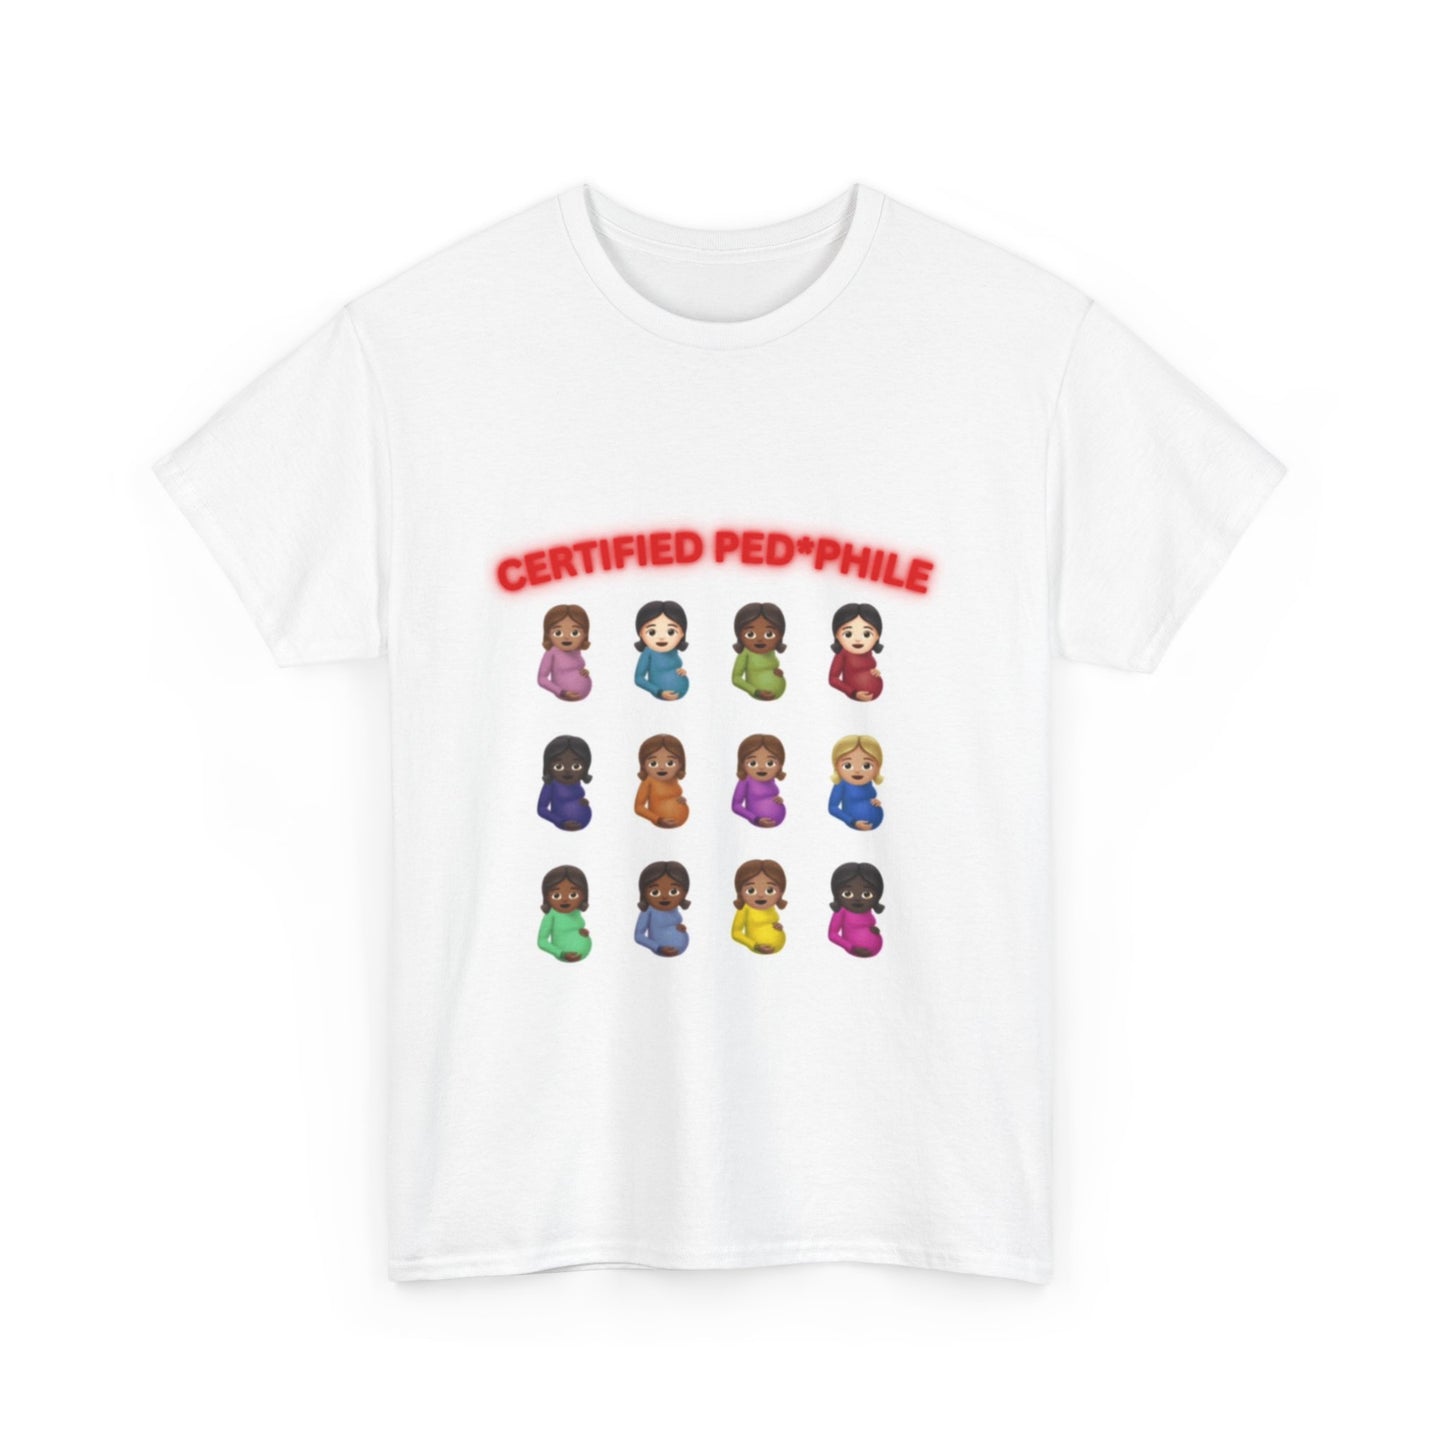 Certified Ped*phile T-shirt